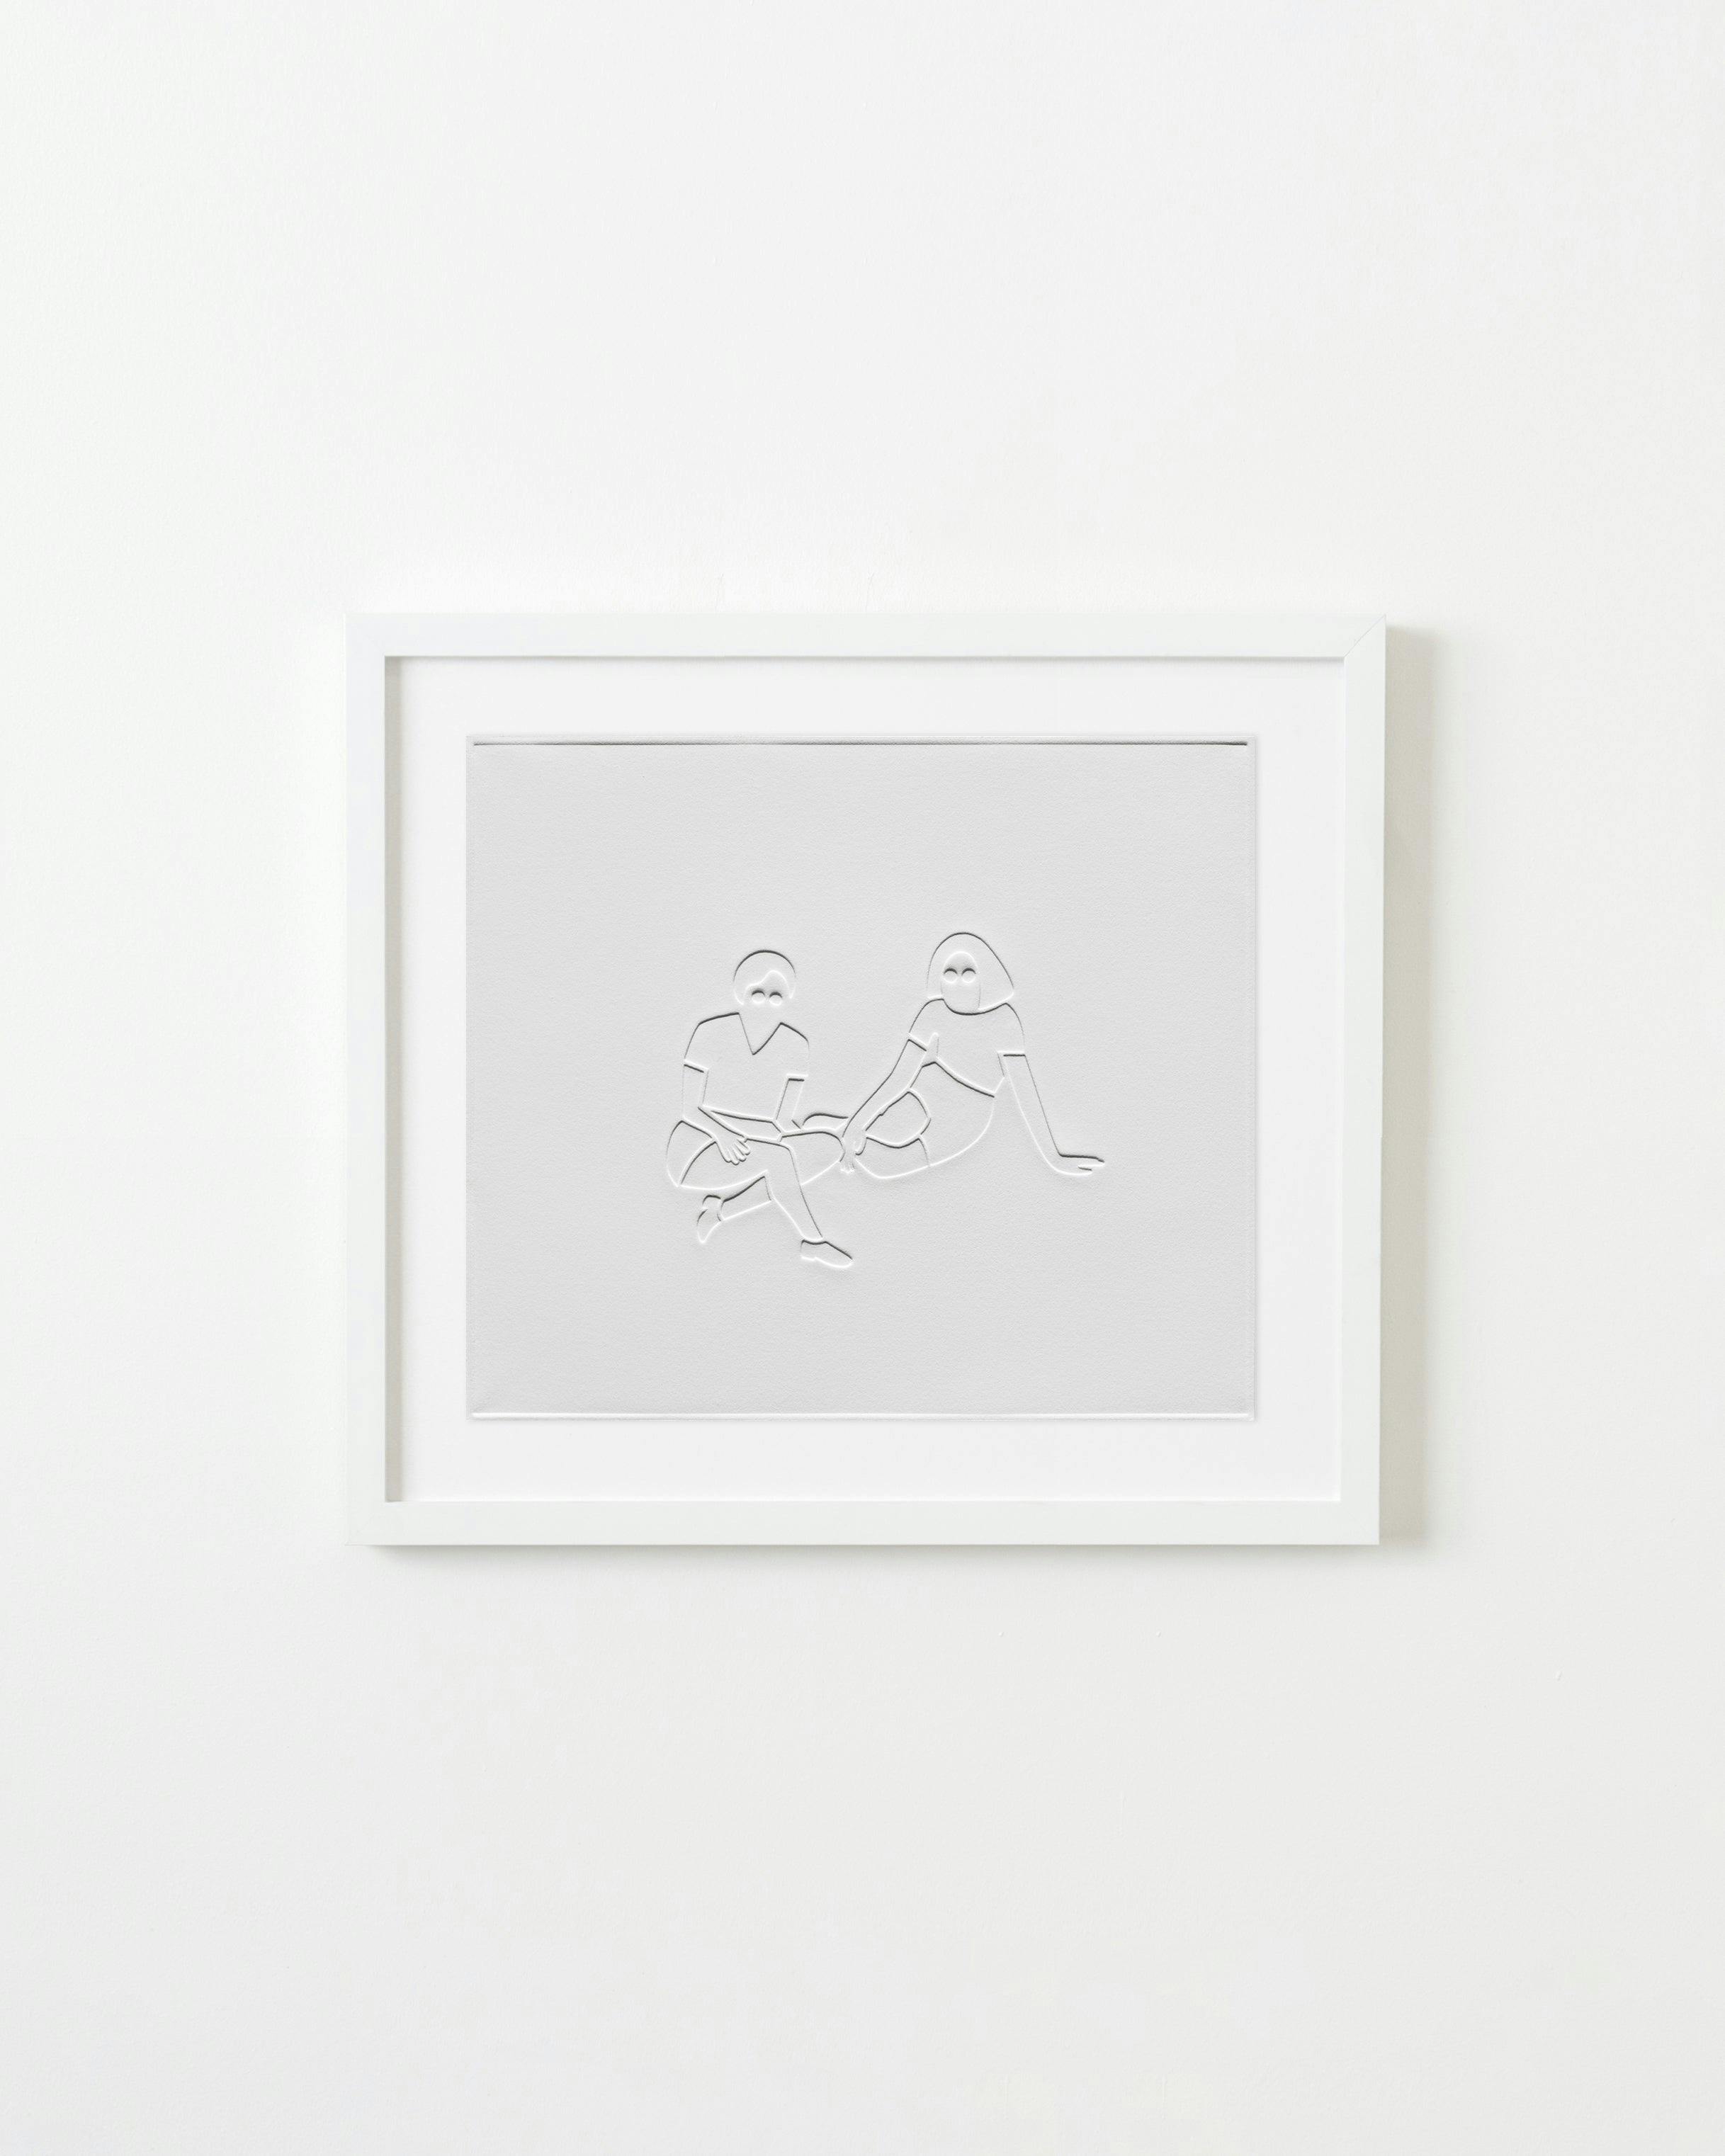 Print by Dana Bell titled "Two Sitting on a Hill, Look Forward".